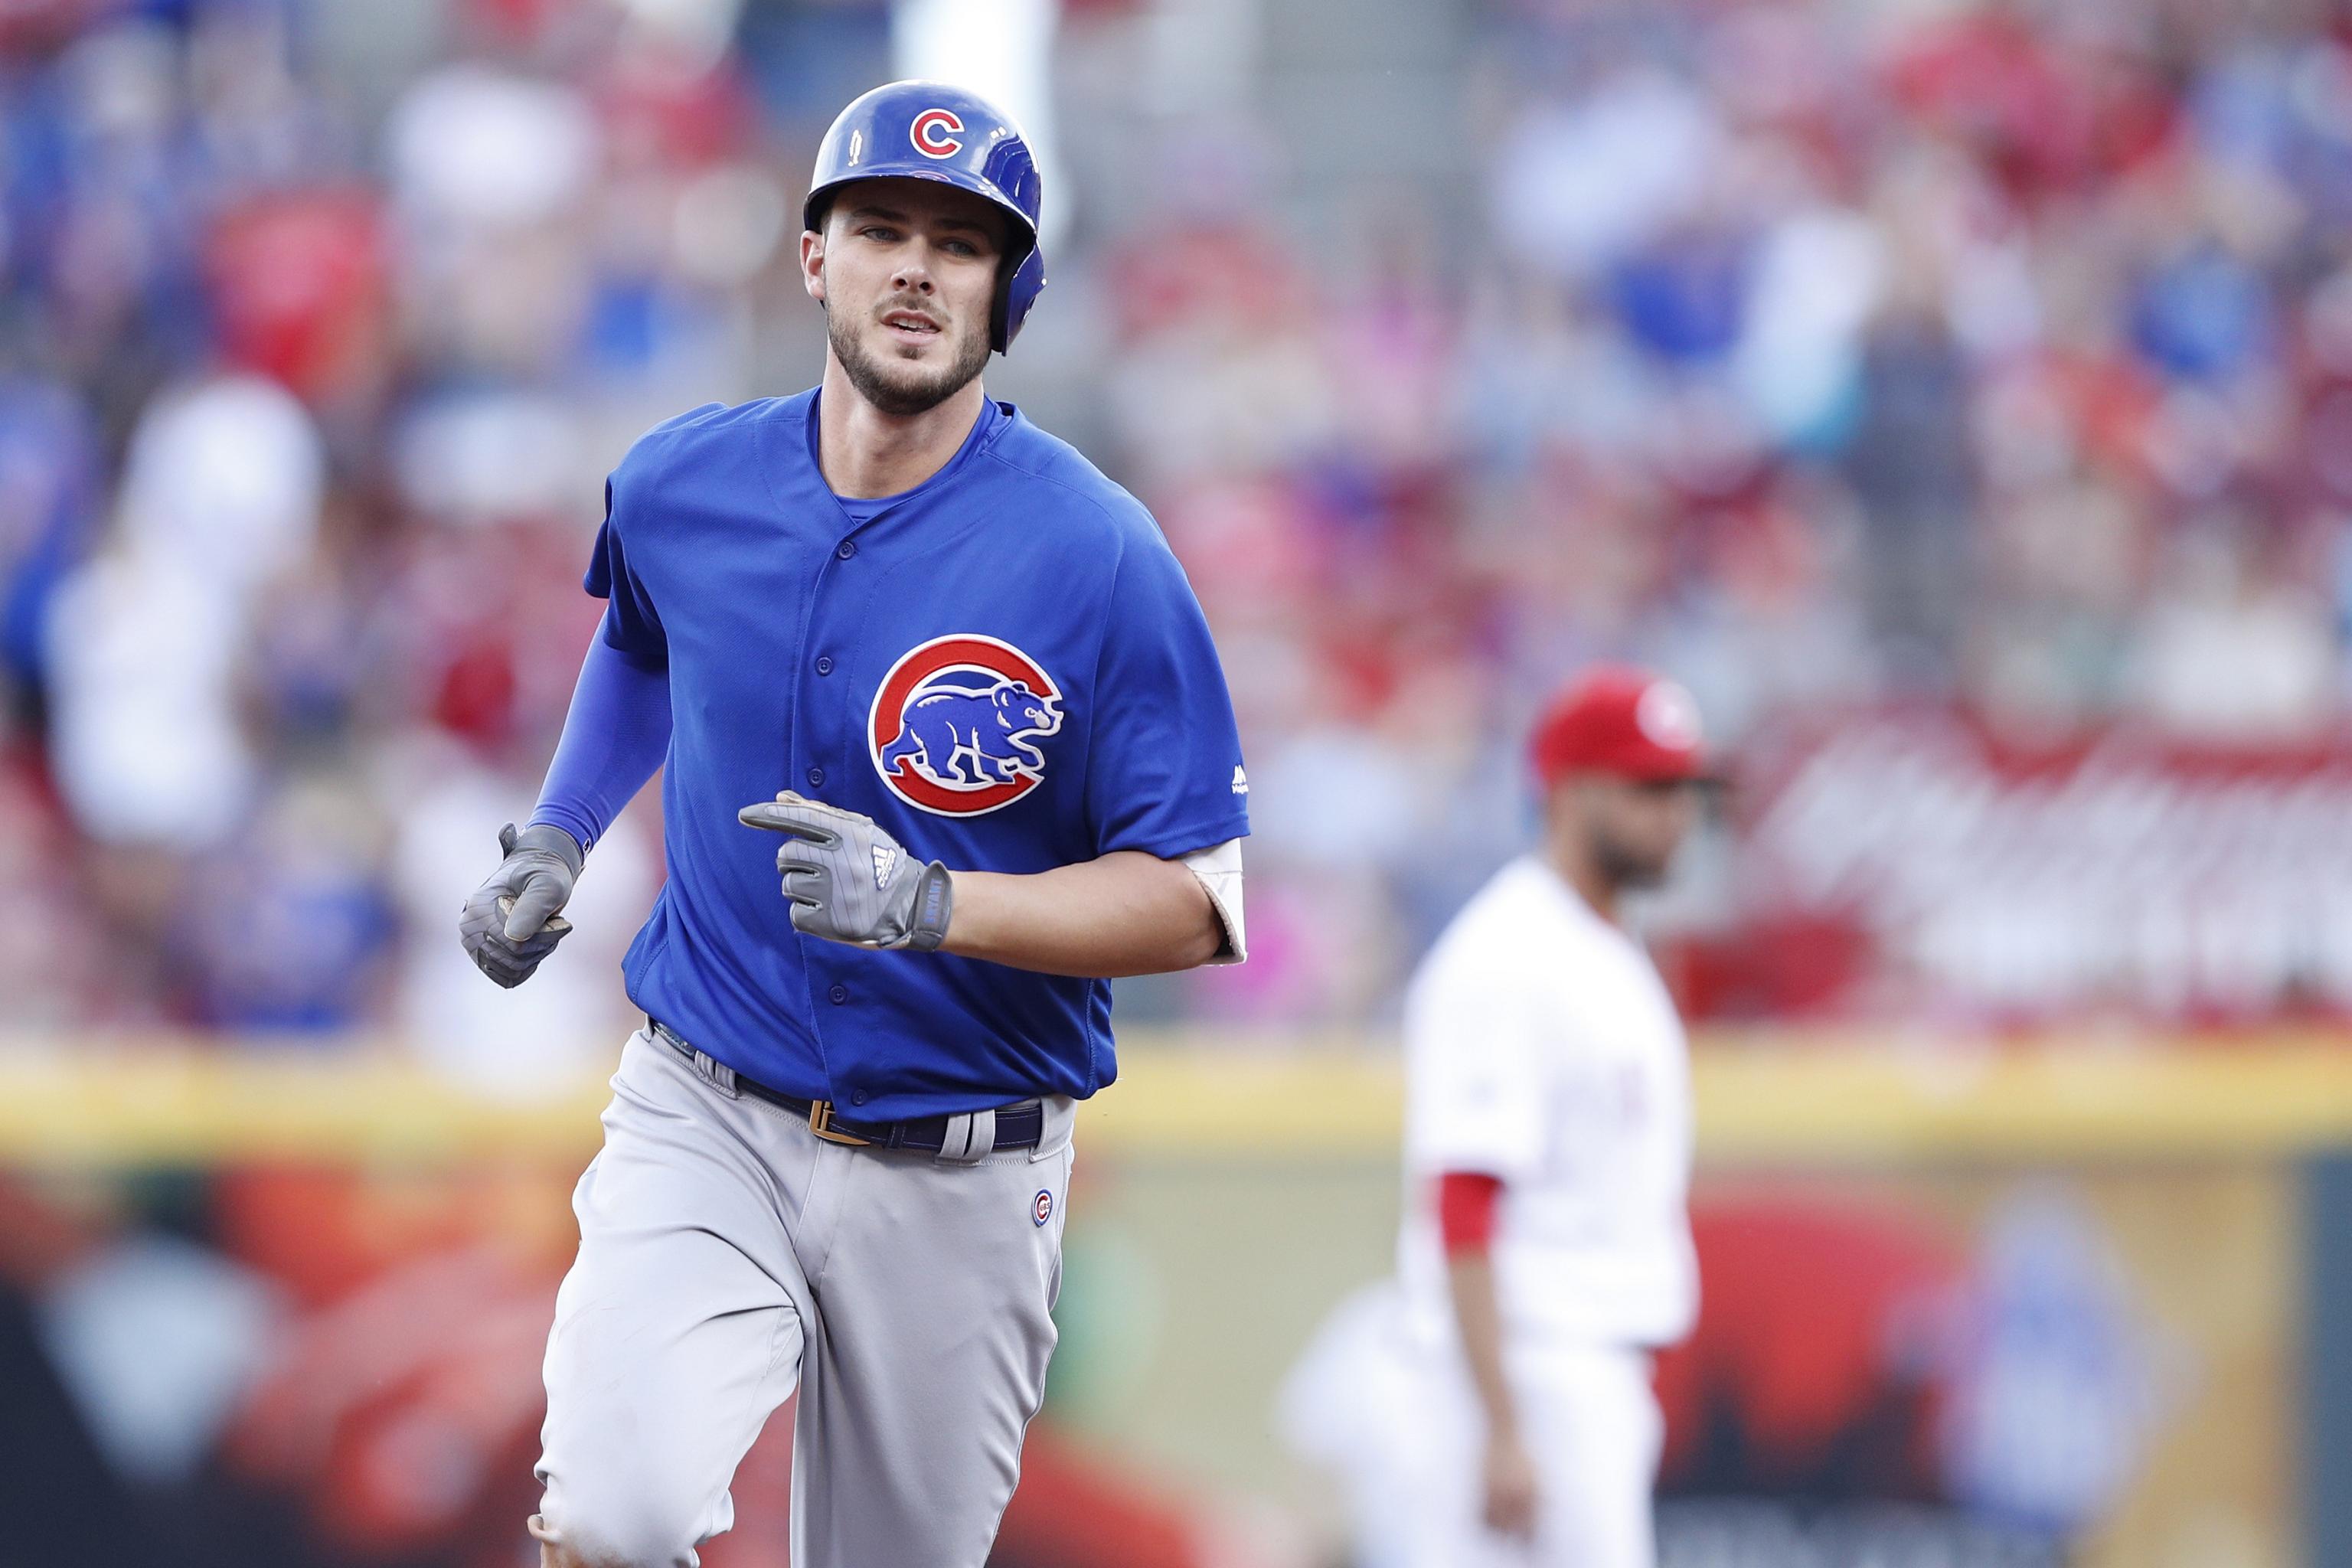 Kris Bryant's Epic 3-HR Game Shines Light on Leap from Phenom to